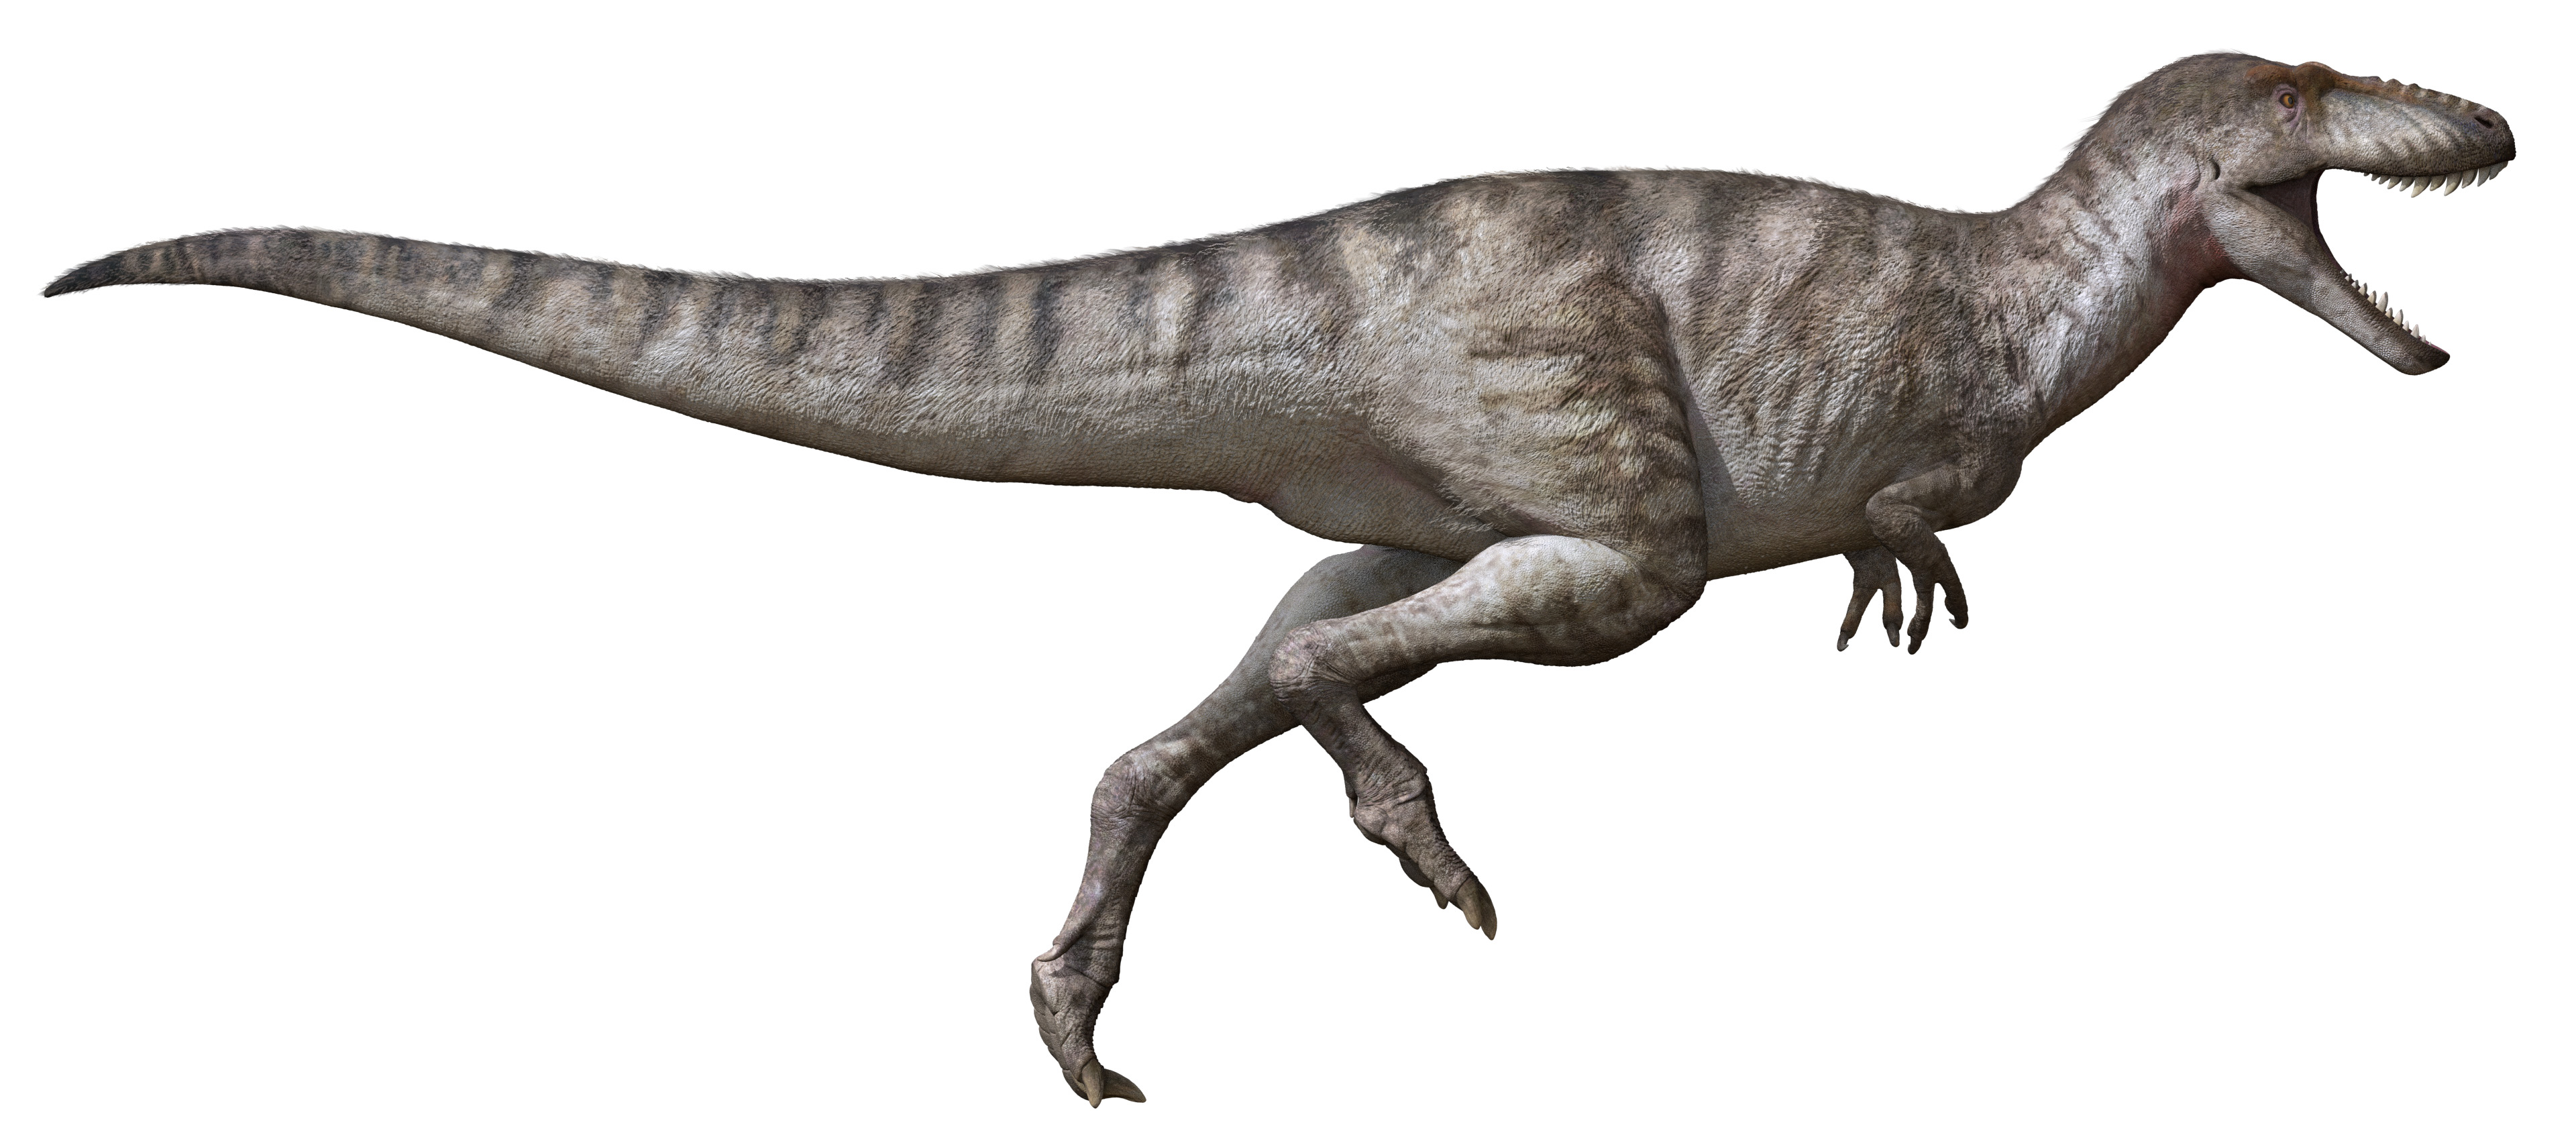 Reconstruction picture of the dinosaur Asiatyrannus xui. /Courtesy of Zheng Wenjie